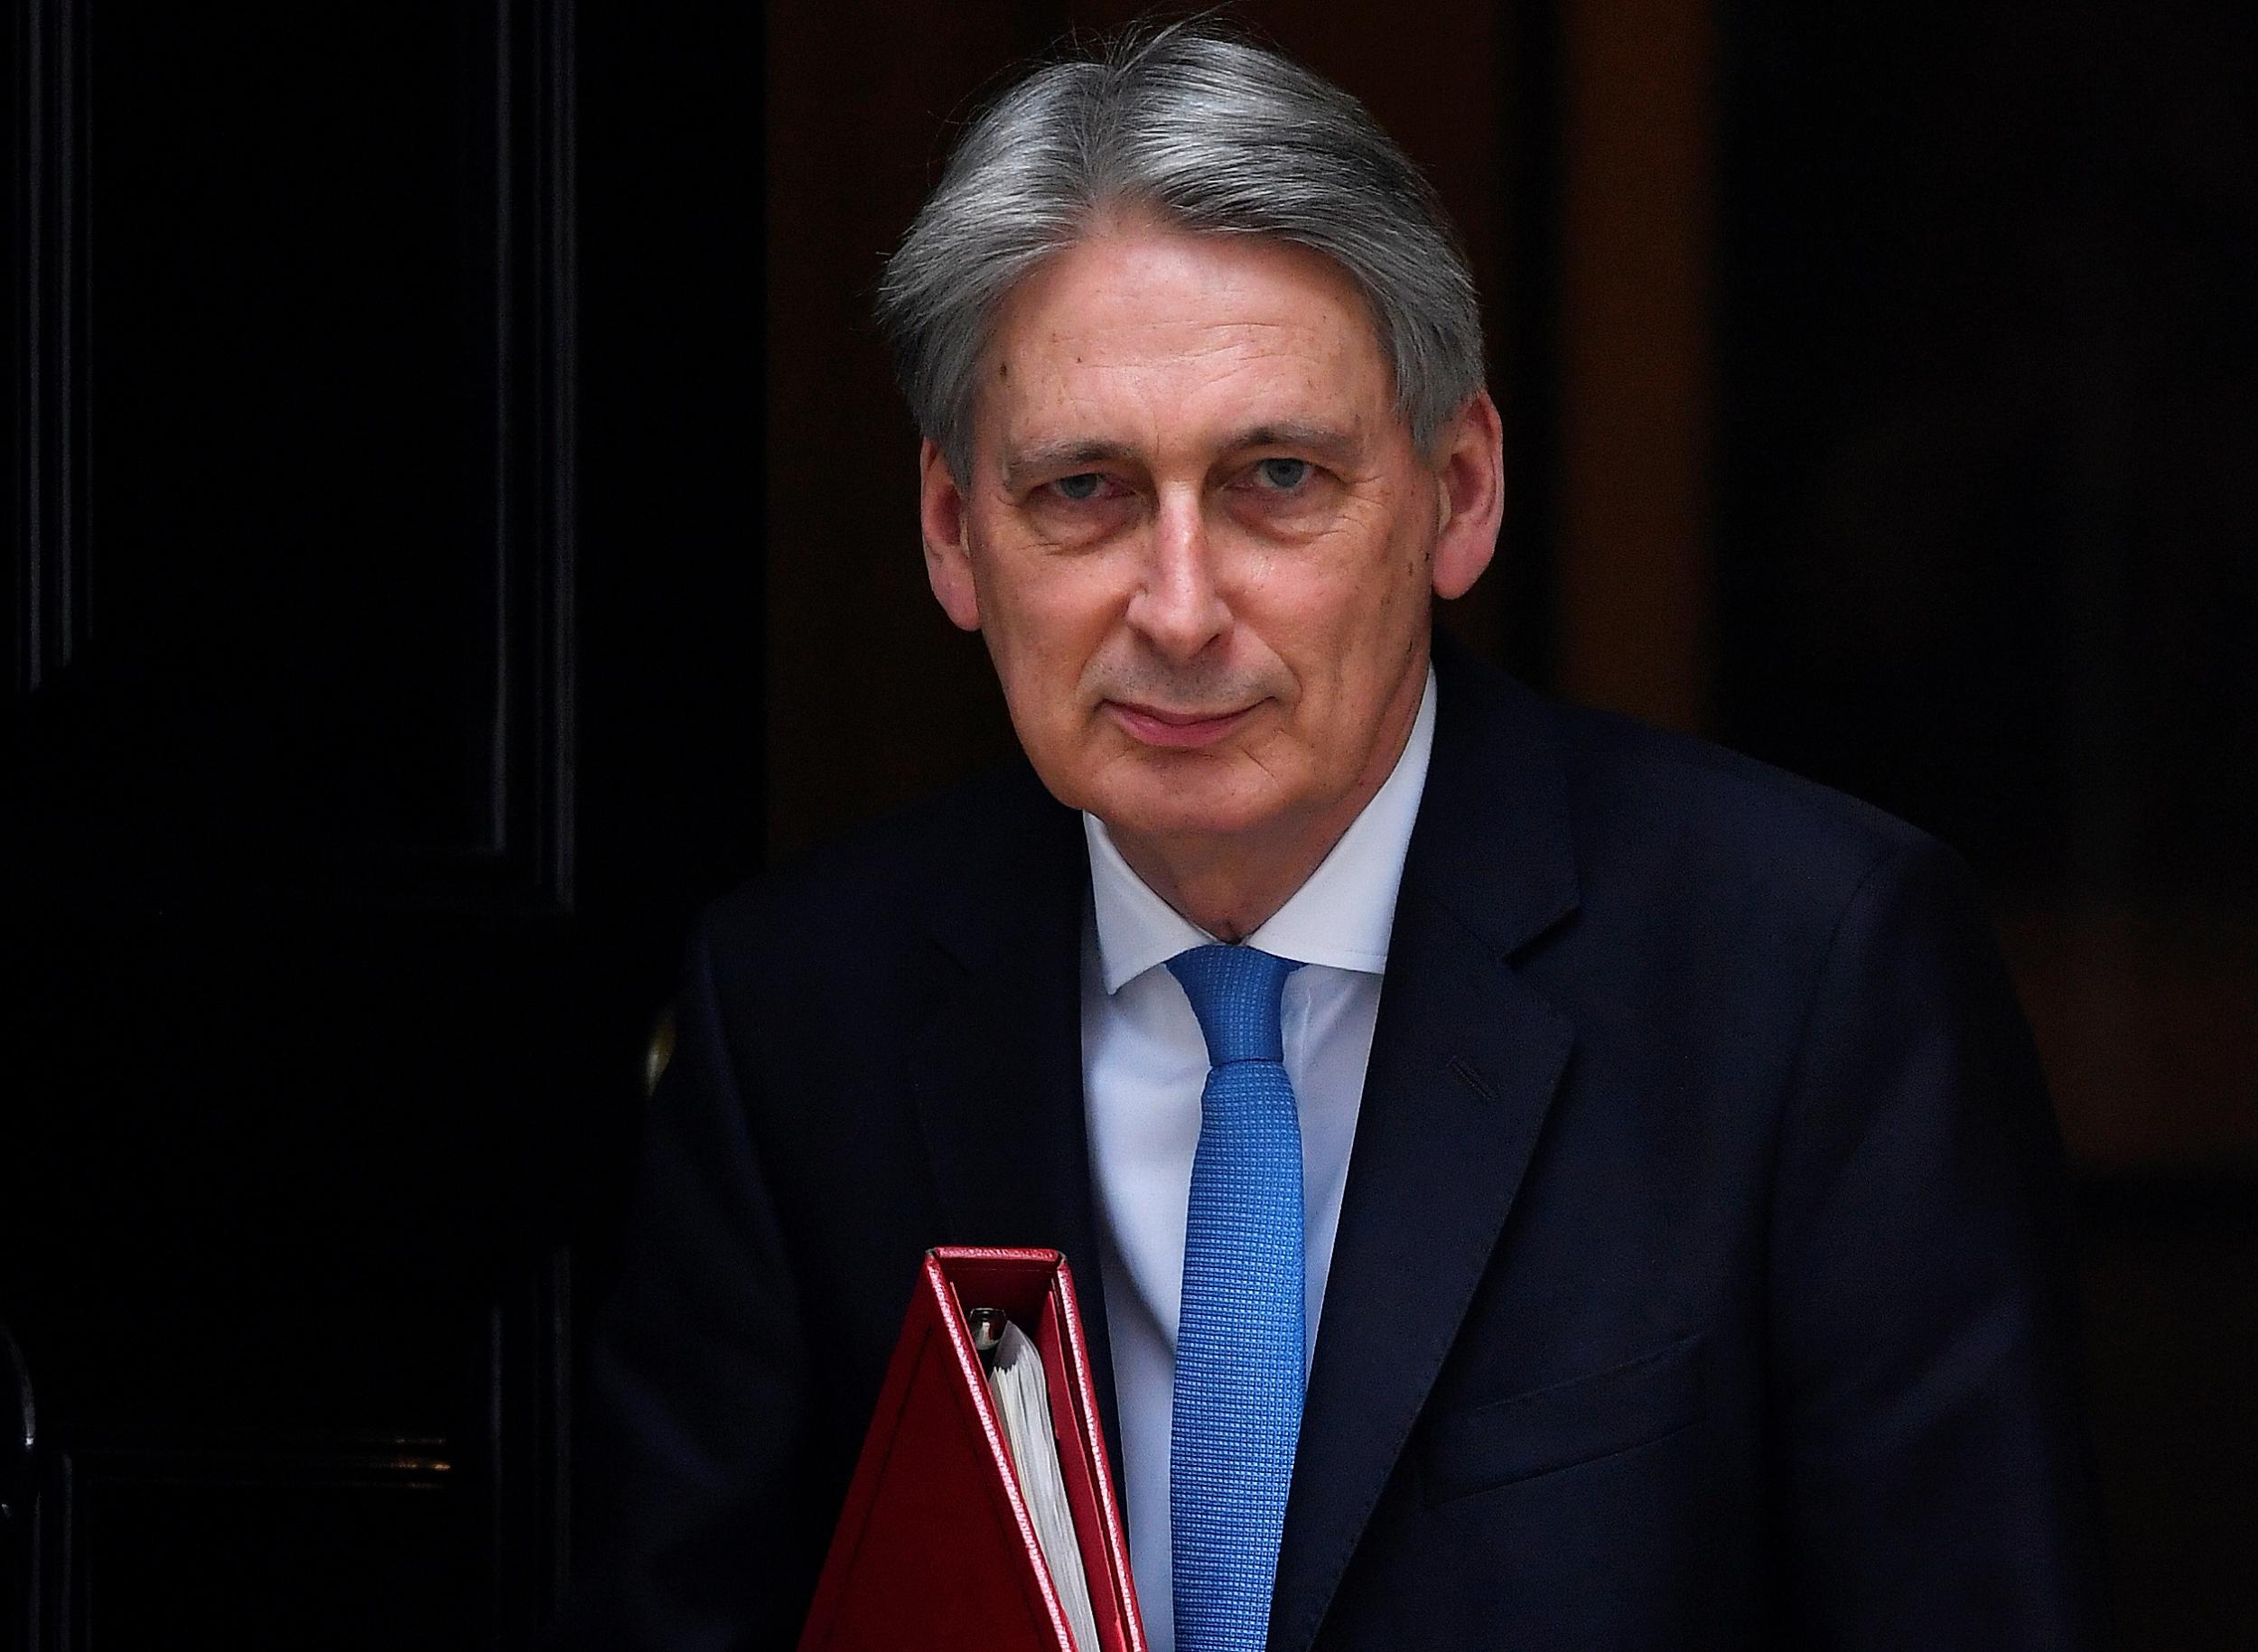 Chancellor Philip Hammond will unveil his latest budget on Monday week